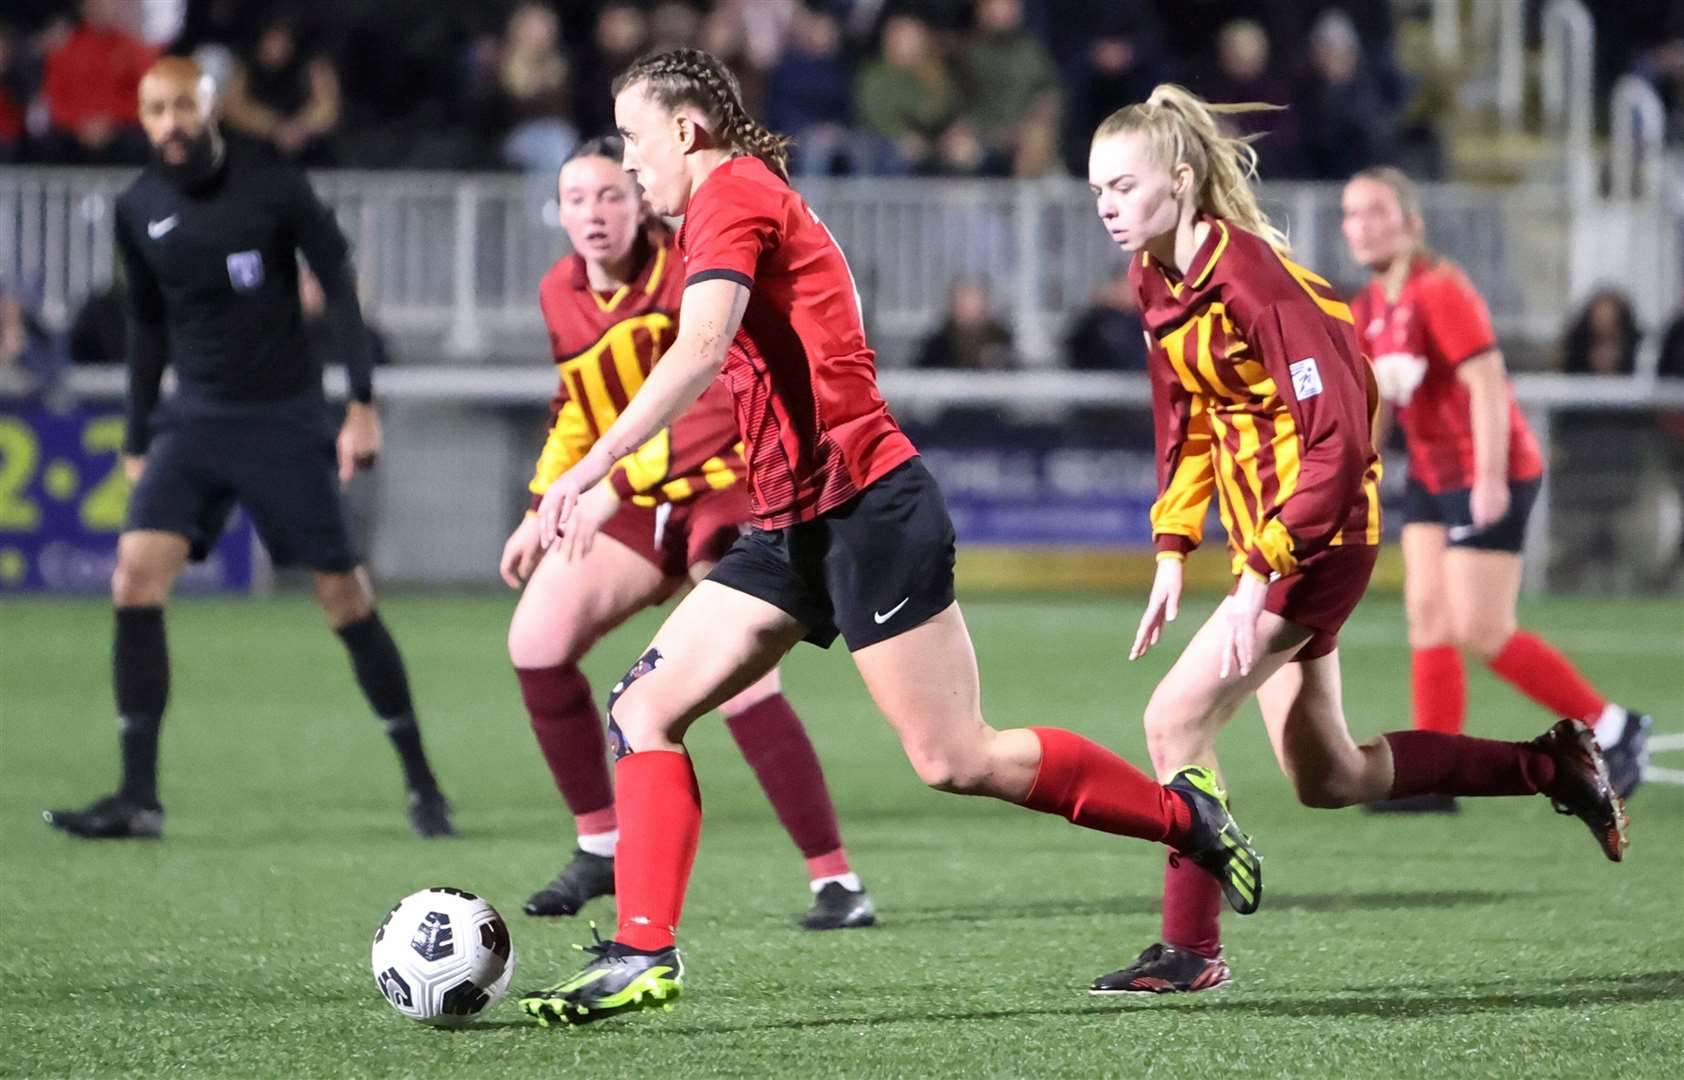 There was plenty of attacking football on show in the DFDS Kent FA Women's Plate Final at Maidstone’s Gallagher Stadium. Picture: PSP Images